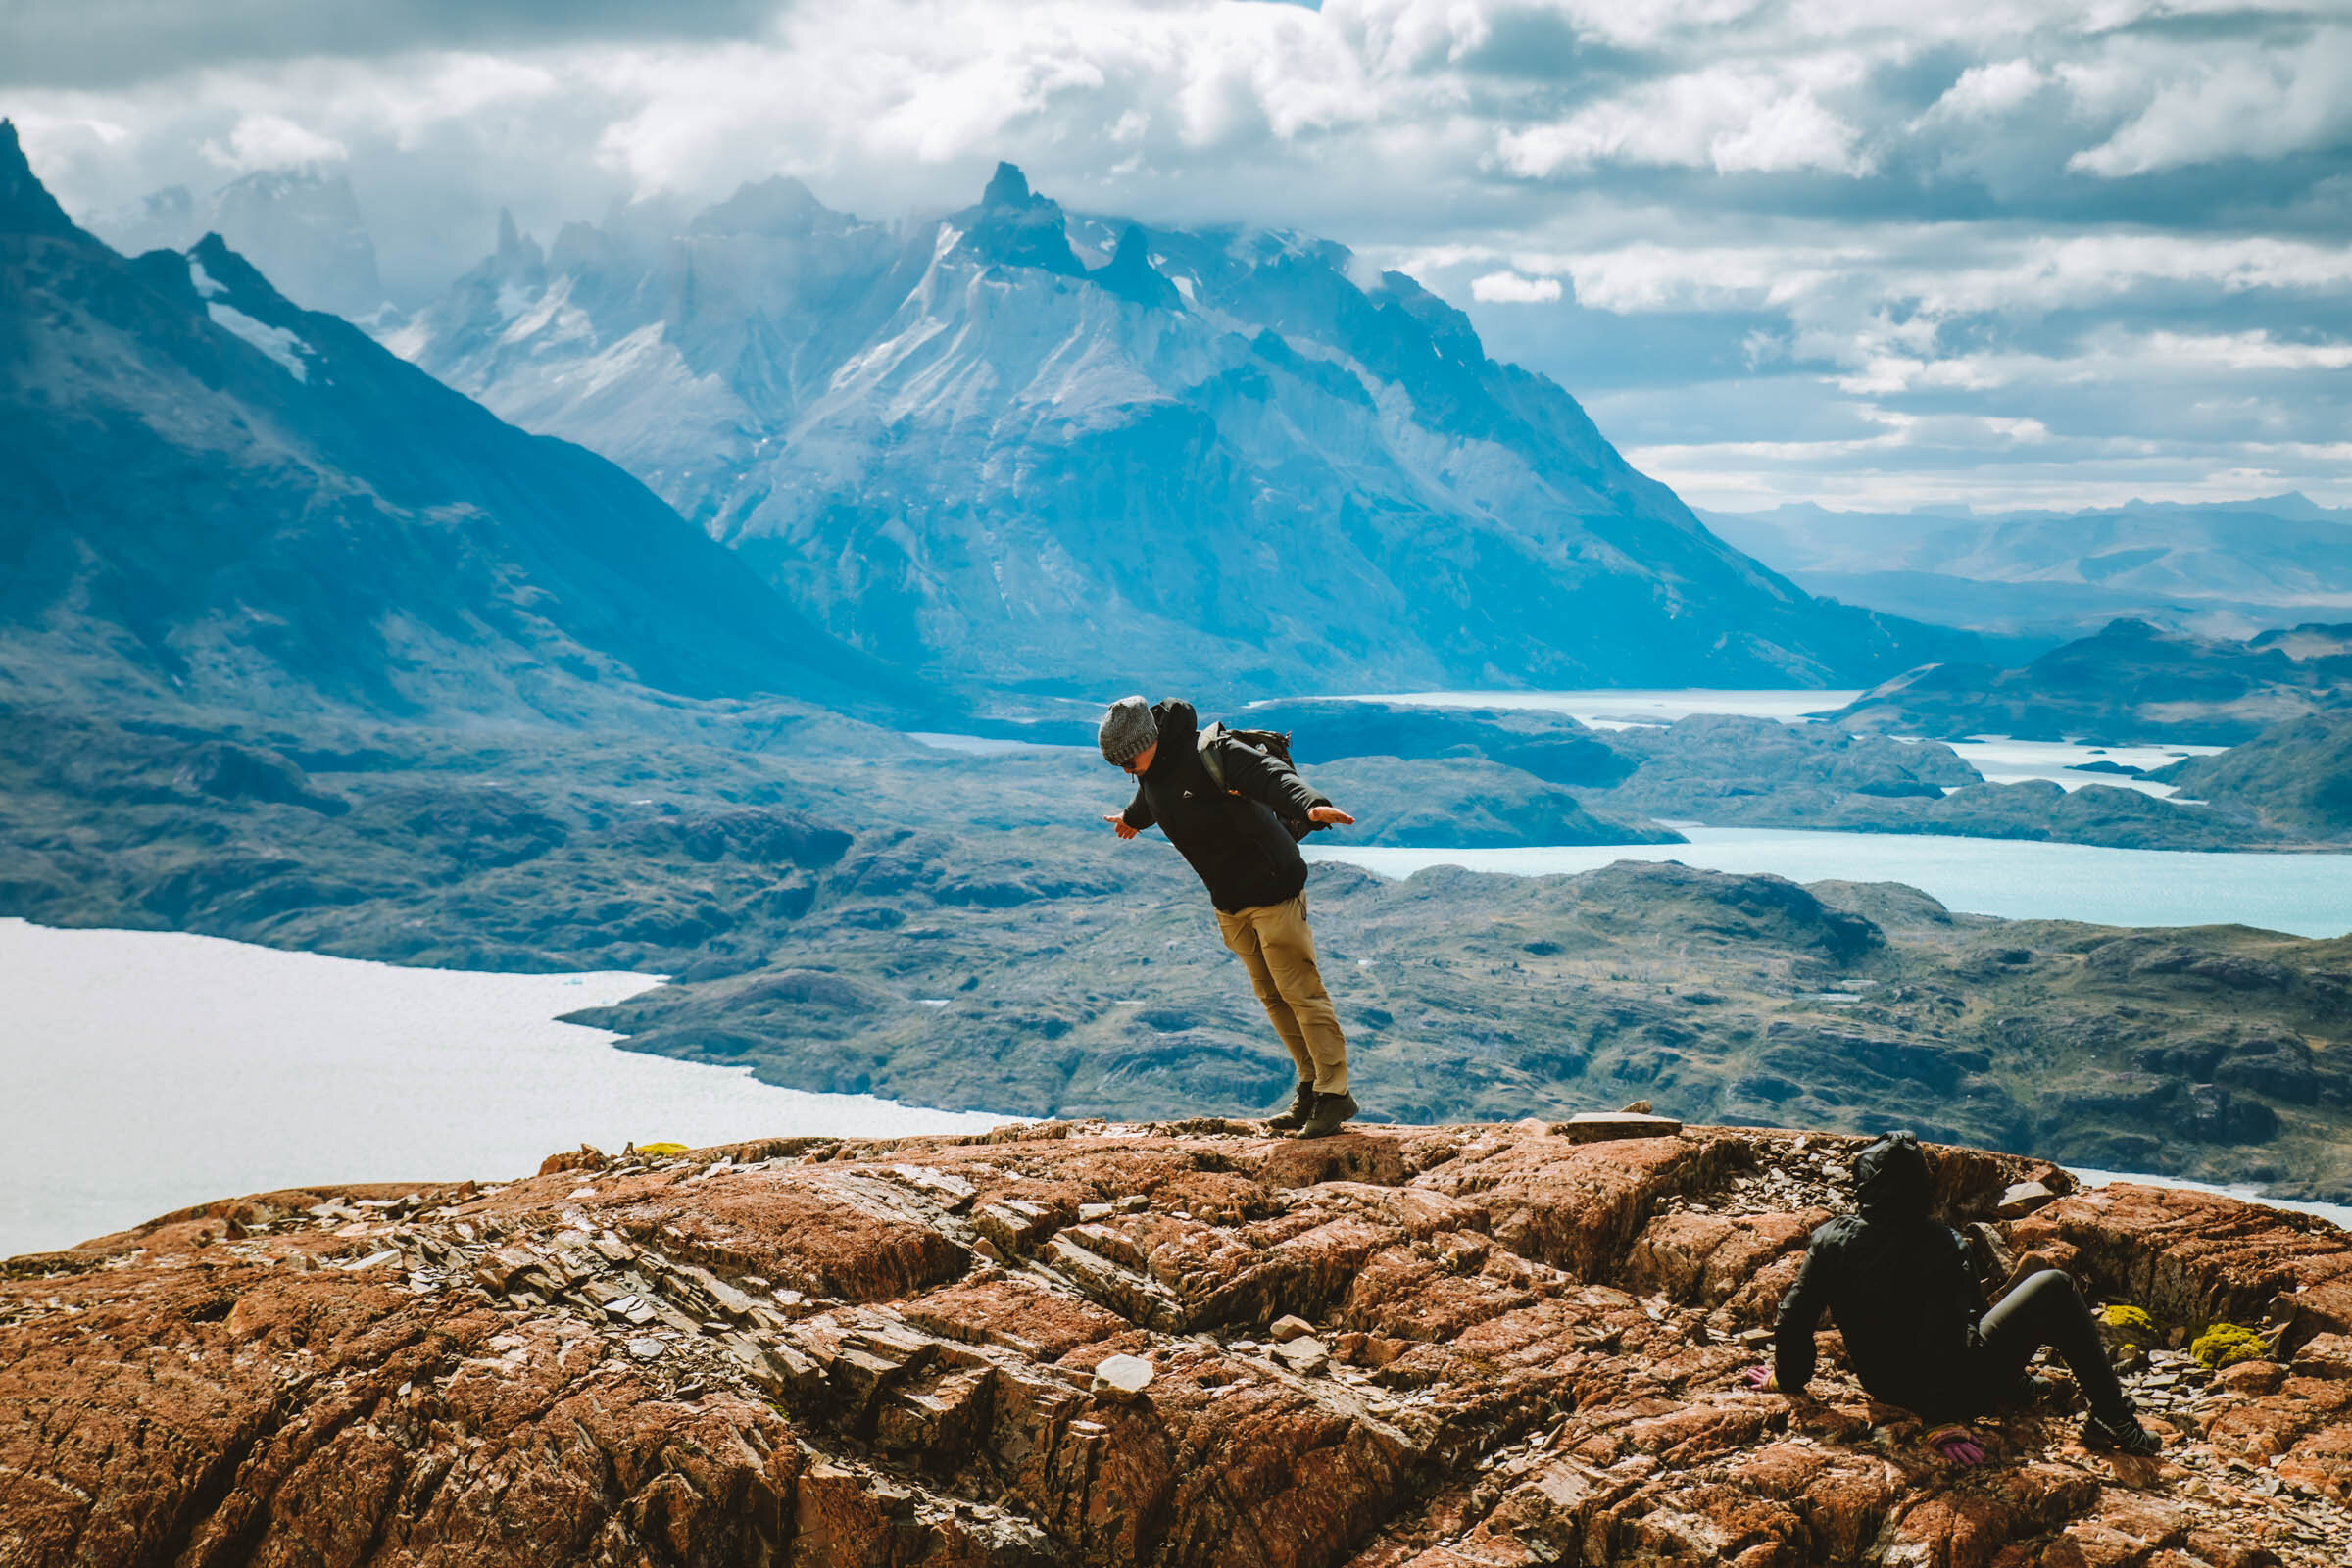  At a latitude of 51 degrees south, Torres del Paine is well out of any normal person’s comfort zone, and the winds can hit 160km/h without breaking a sweat. This felt like a place that humans weren’t designed for and stepping outside was generally u